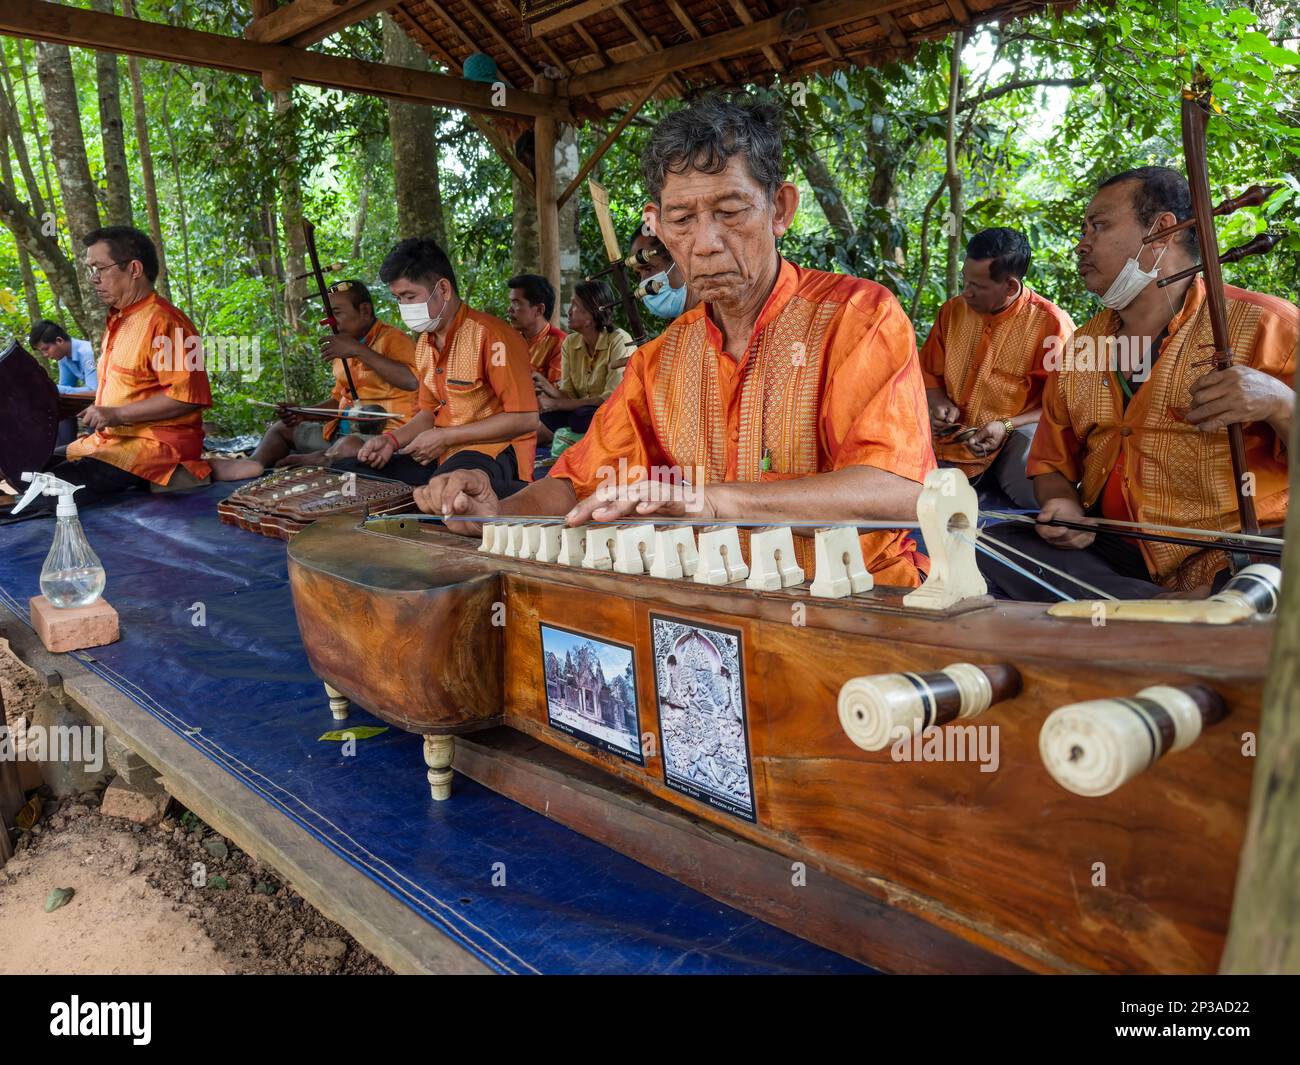 A group of men disabled by landmines play traditional Cambodian music at Banteay Srey temple in Angkor, Cambodia. Stock Photo